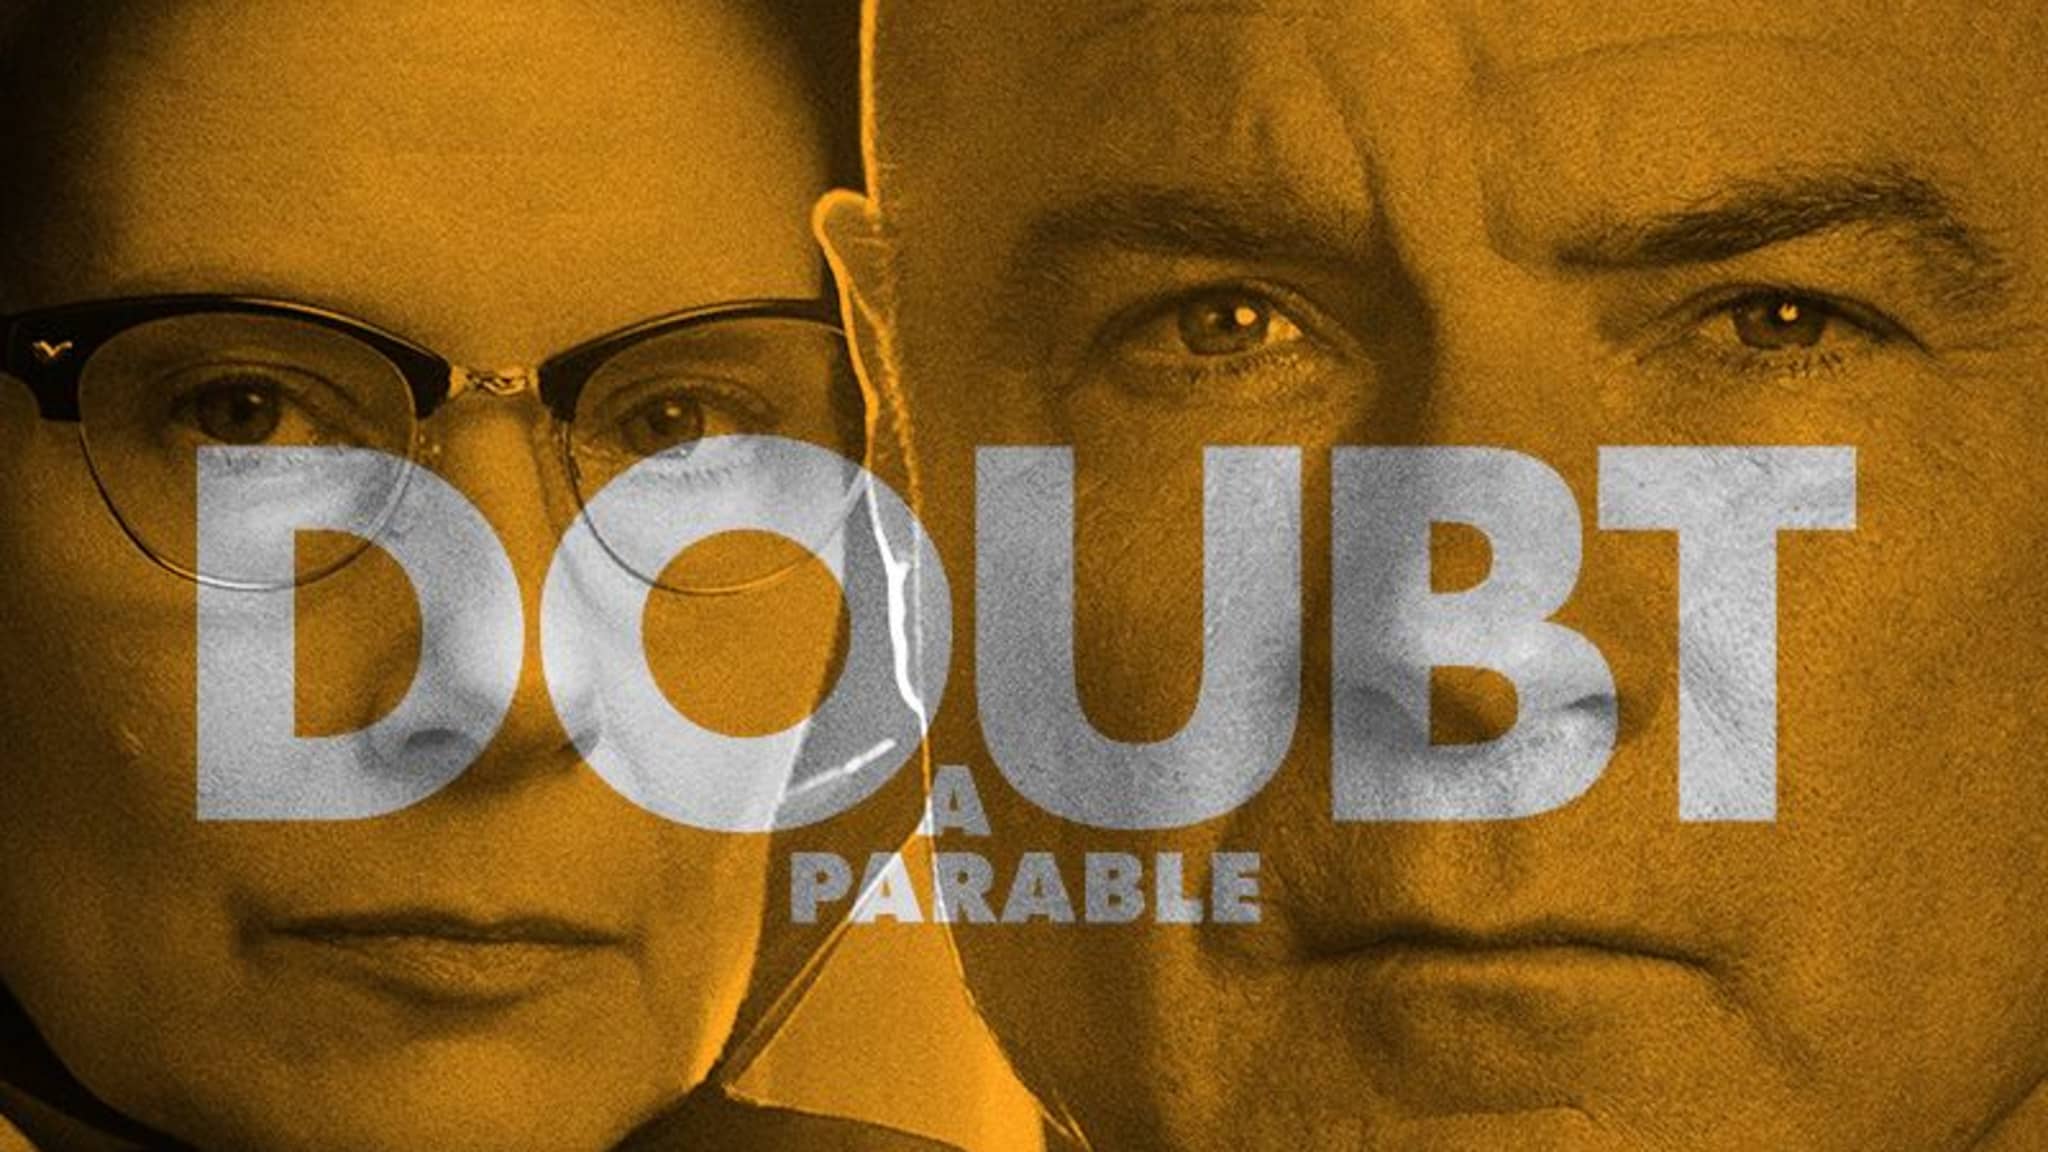 Amy Ryan and Liev Schreiber in black clothes dressed as religious figures with a yellow overlay over the image. Doubt is written across the poster.